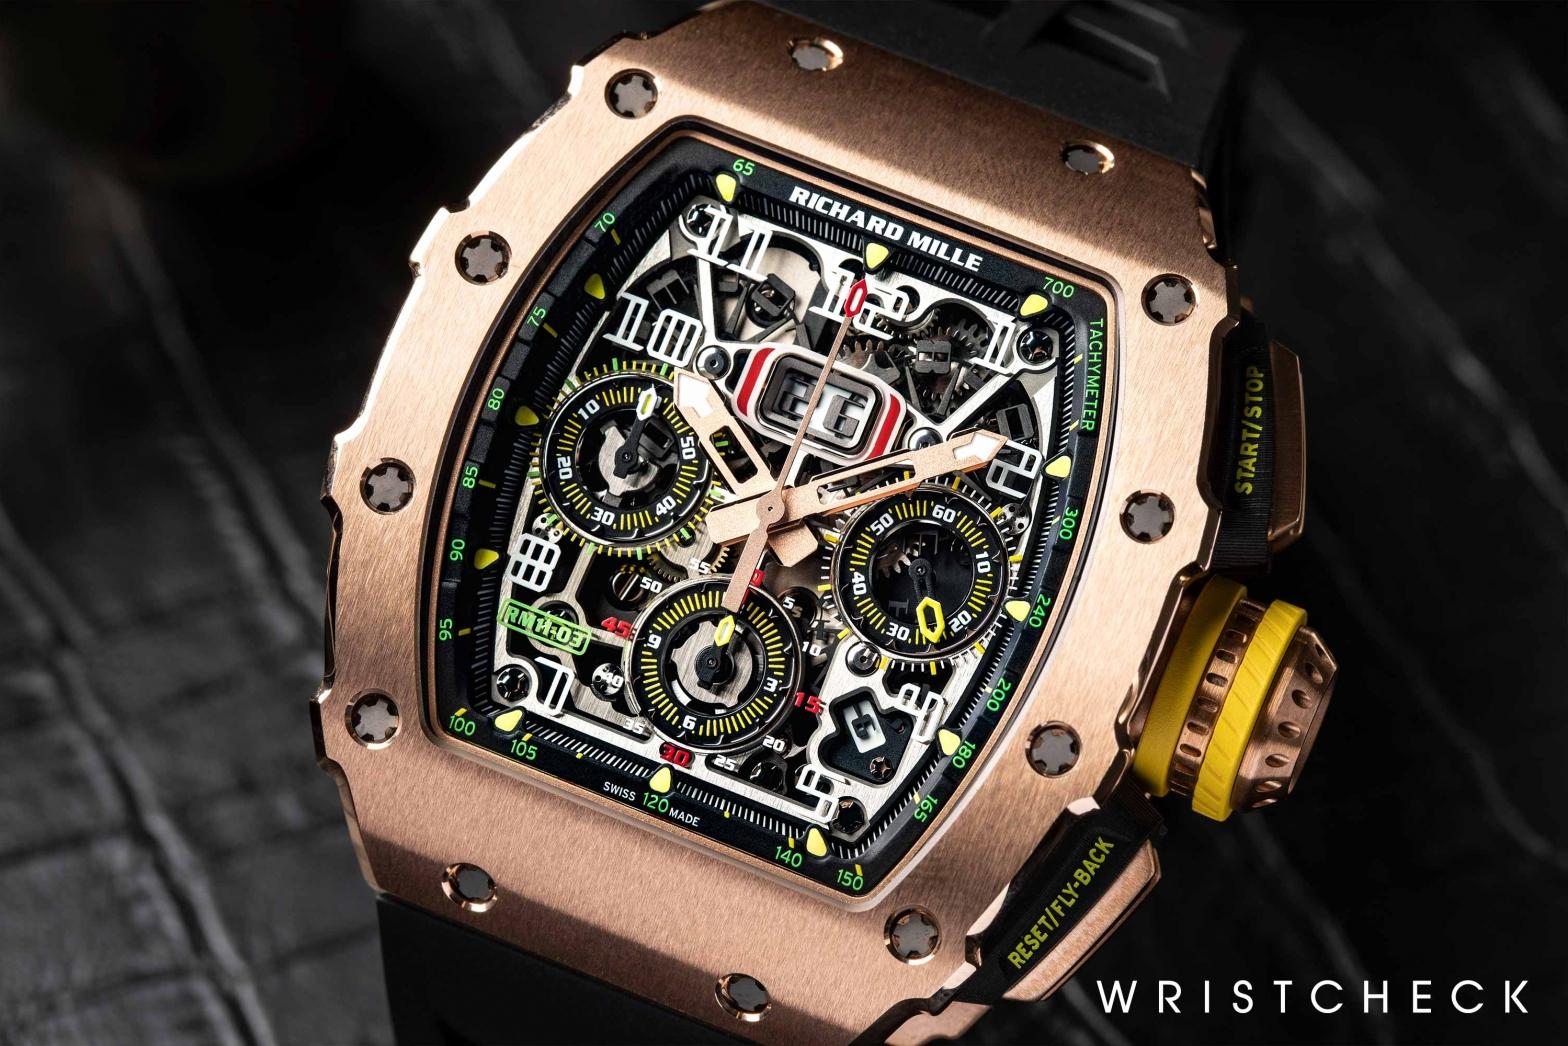 The Richard Mille RM 11-03 Flyback Chronograph in rose gold with a skeletonized dial